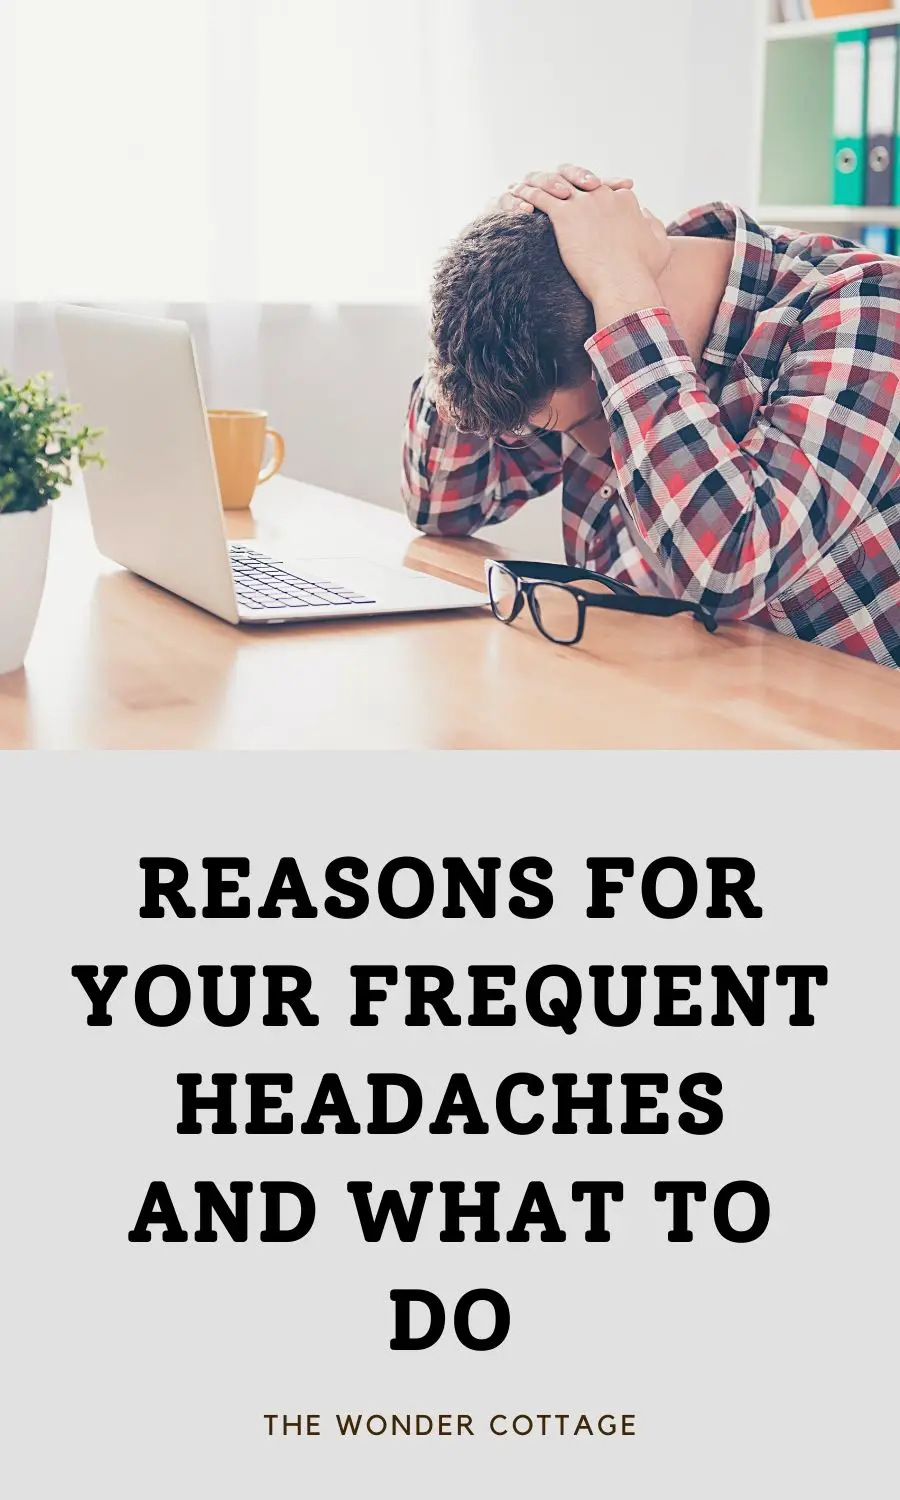 Reasons For Your Frequent Headaches And What To Do